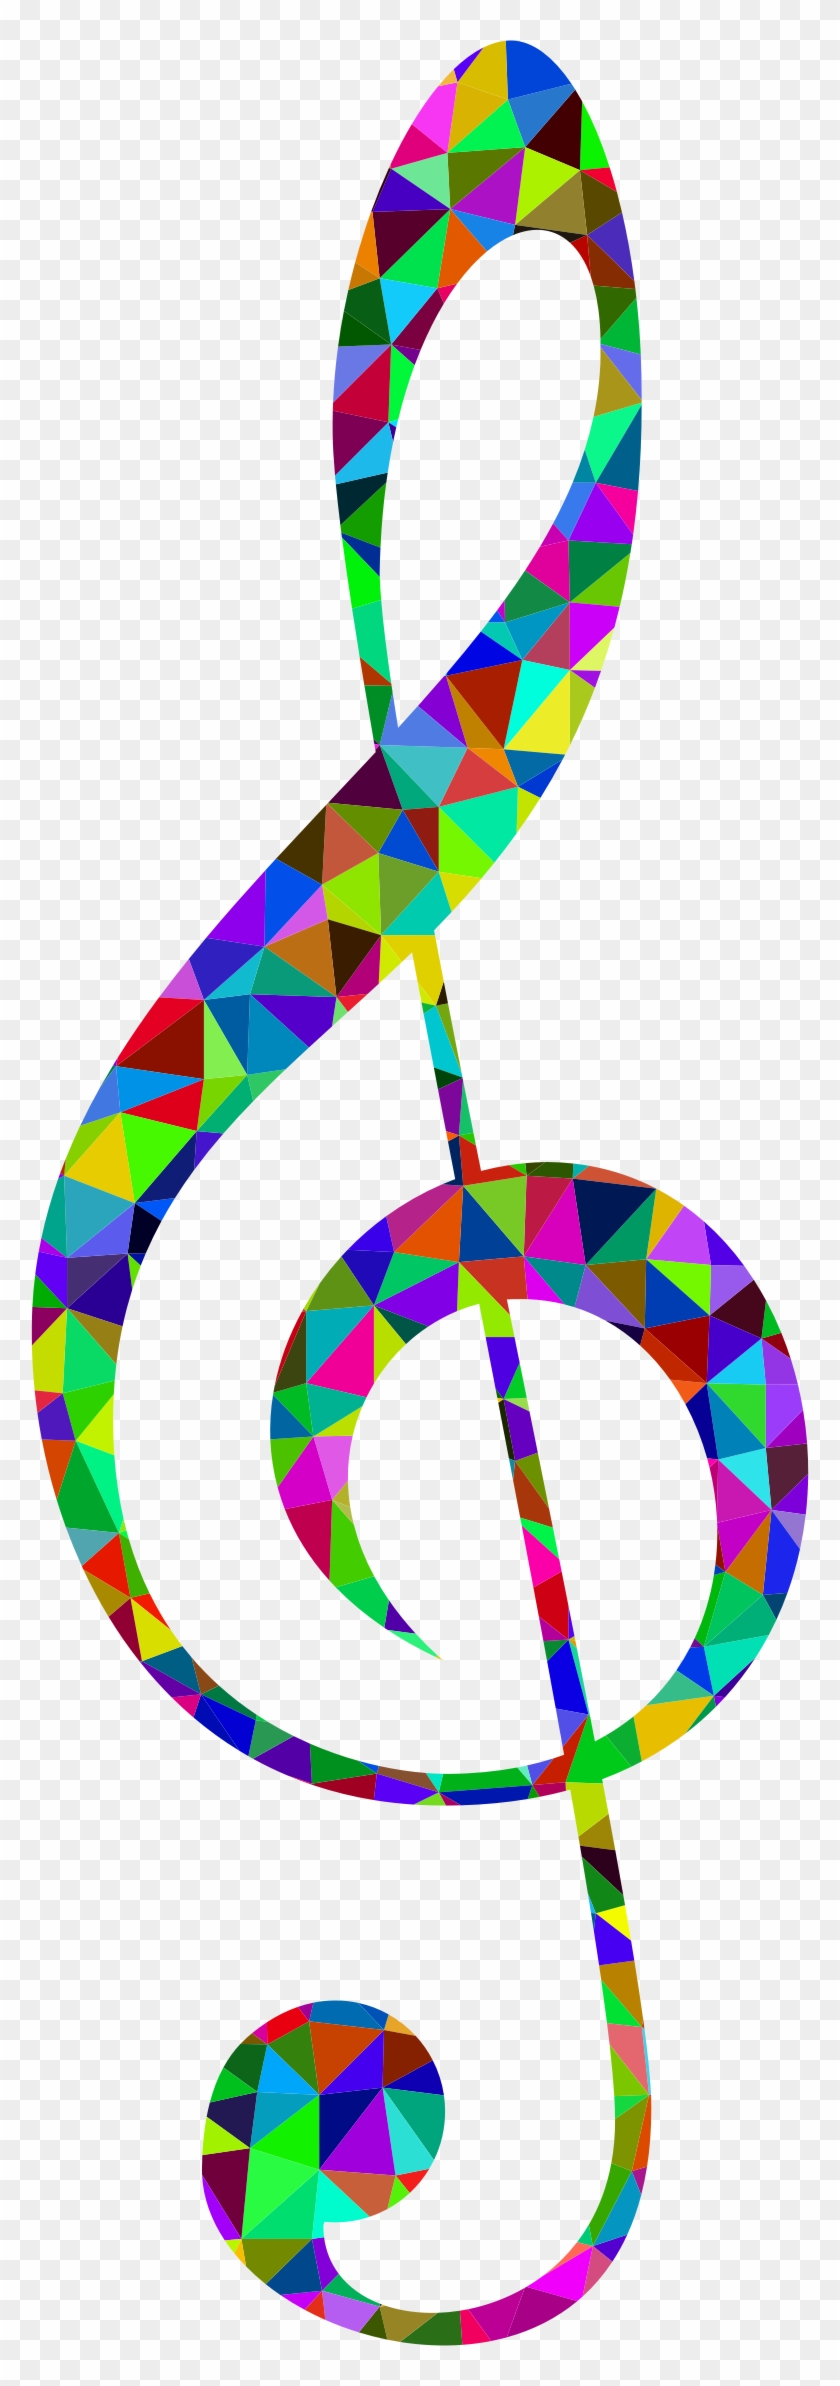 Big Image - Music Note Looks Like S Clipart #1194849